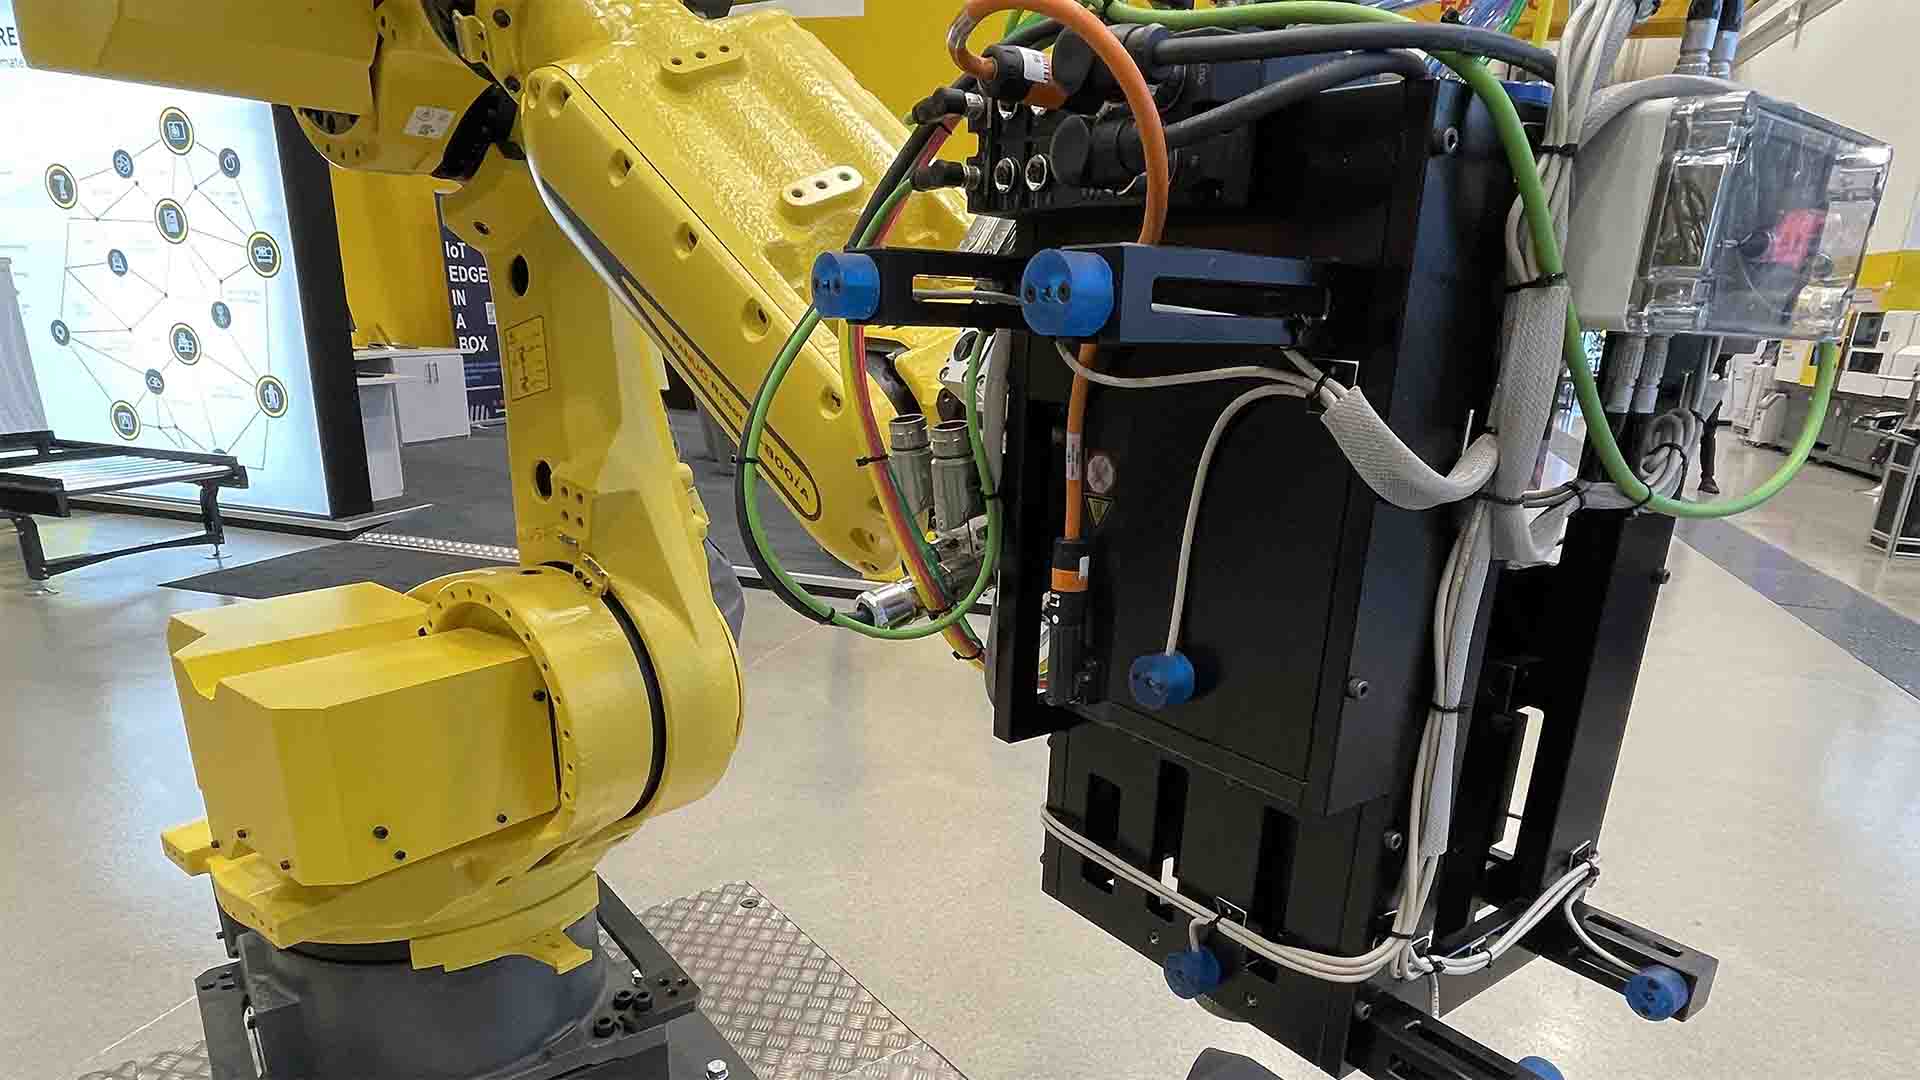 Development of a robotic system for automated drilling and inspection of small aerostructures